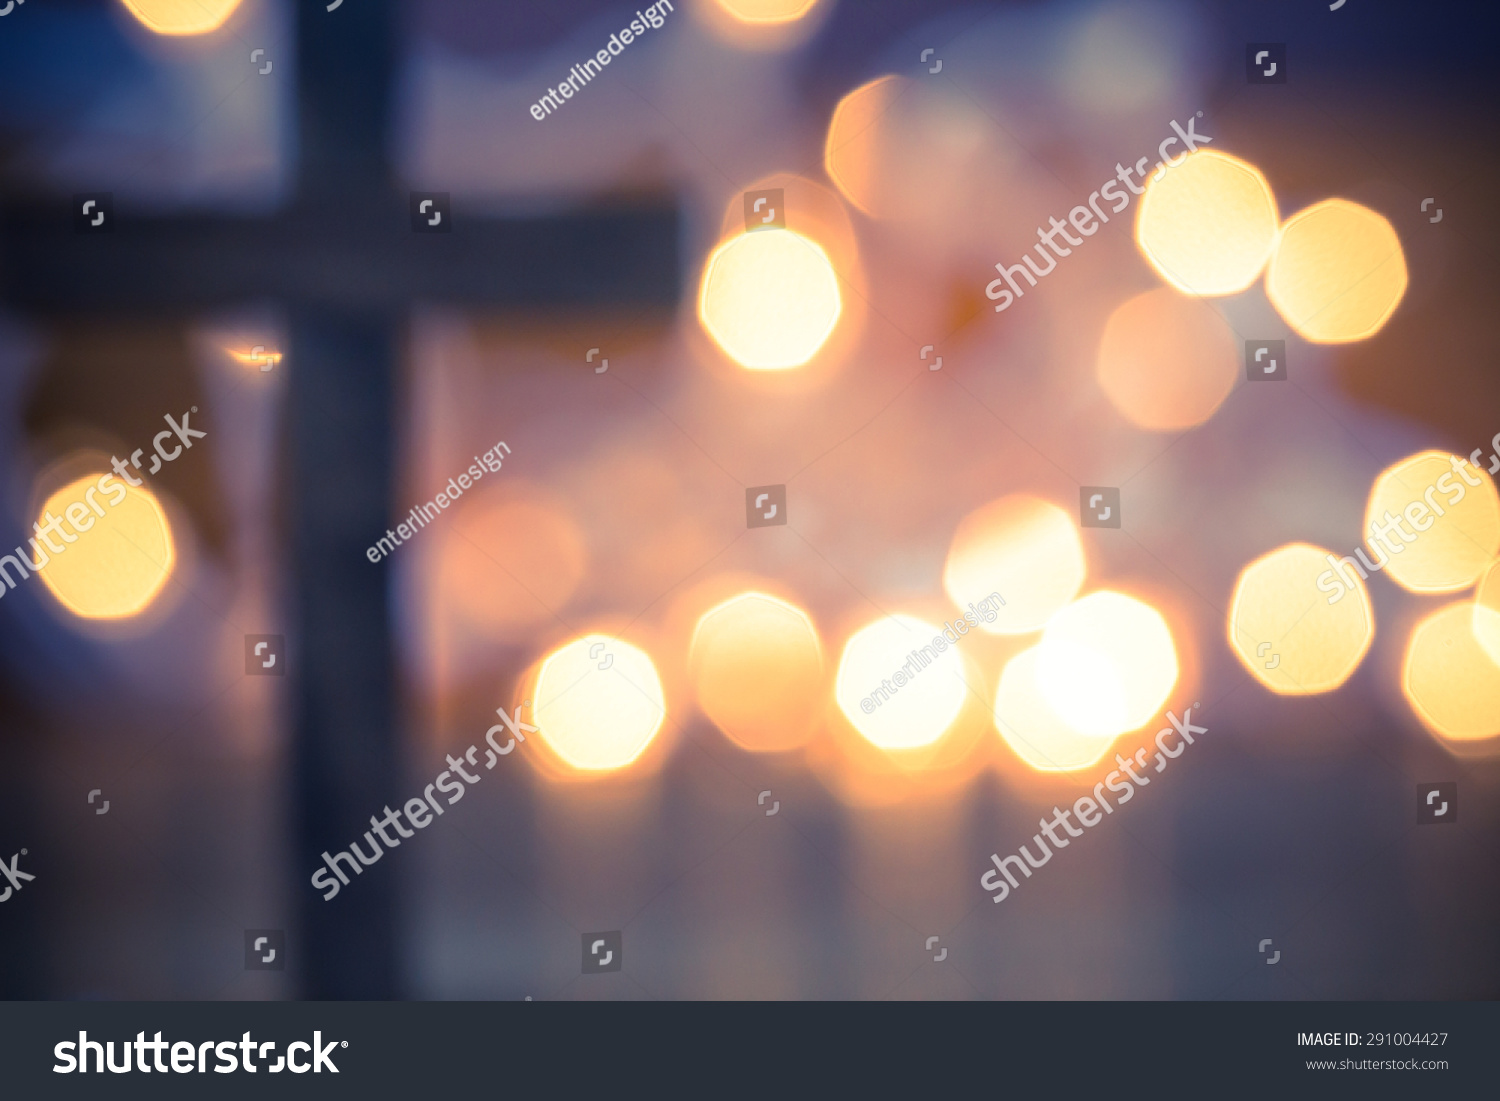 Wooden Christian Cross out of focus with a soft bokeh lights background #291004427